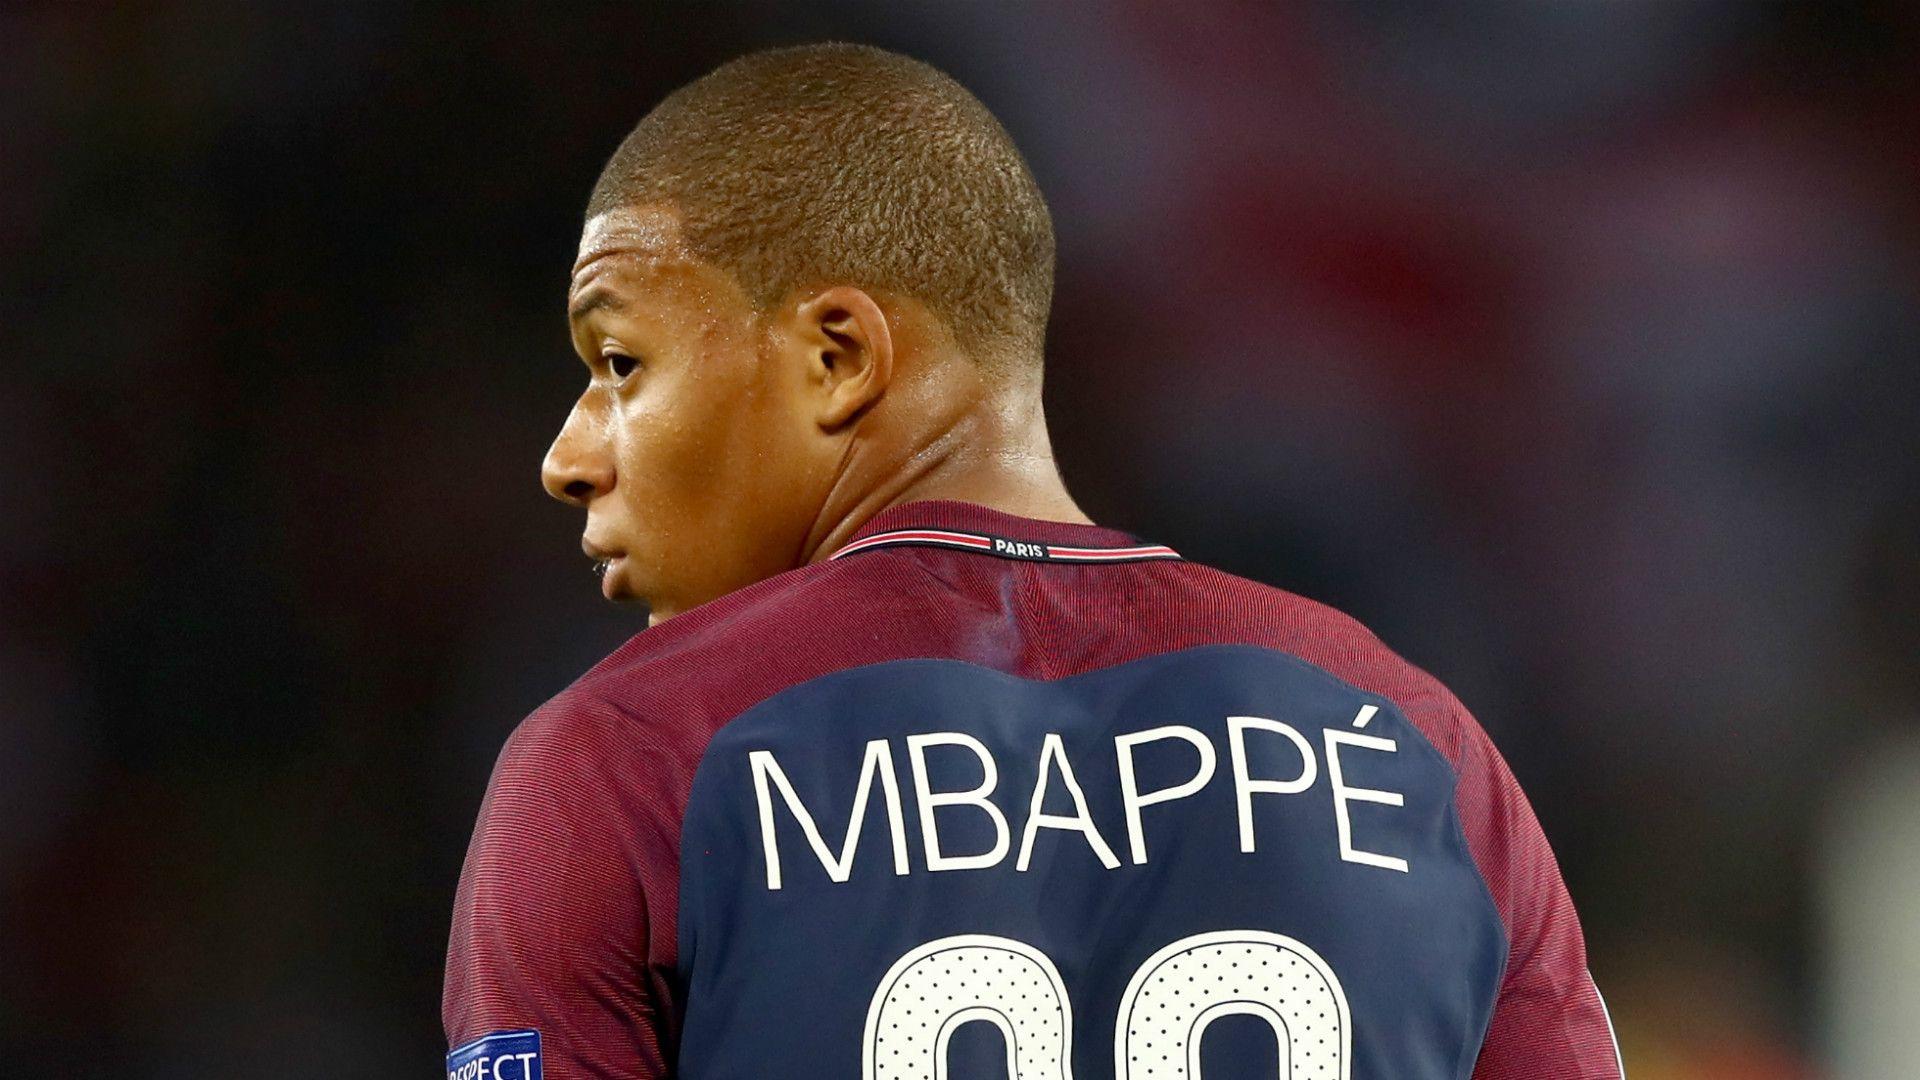 kylian mbappe HD image and Background Image HD